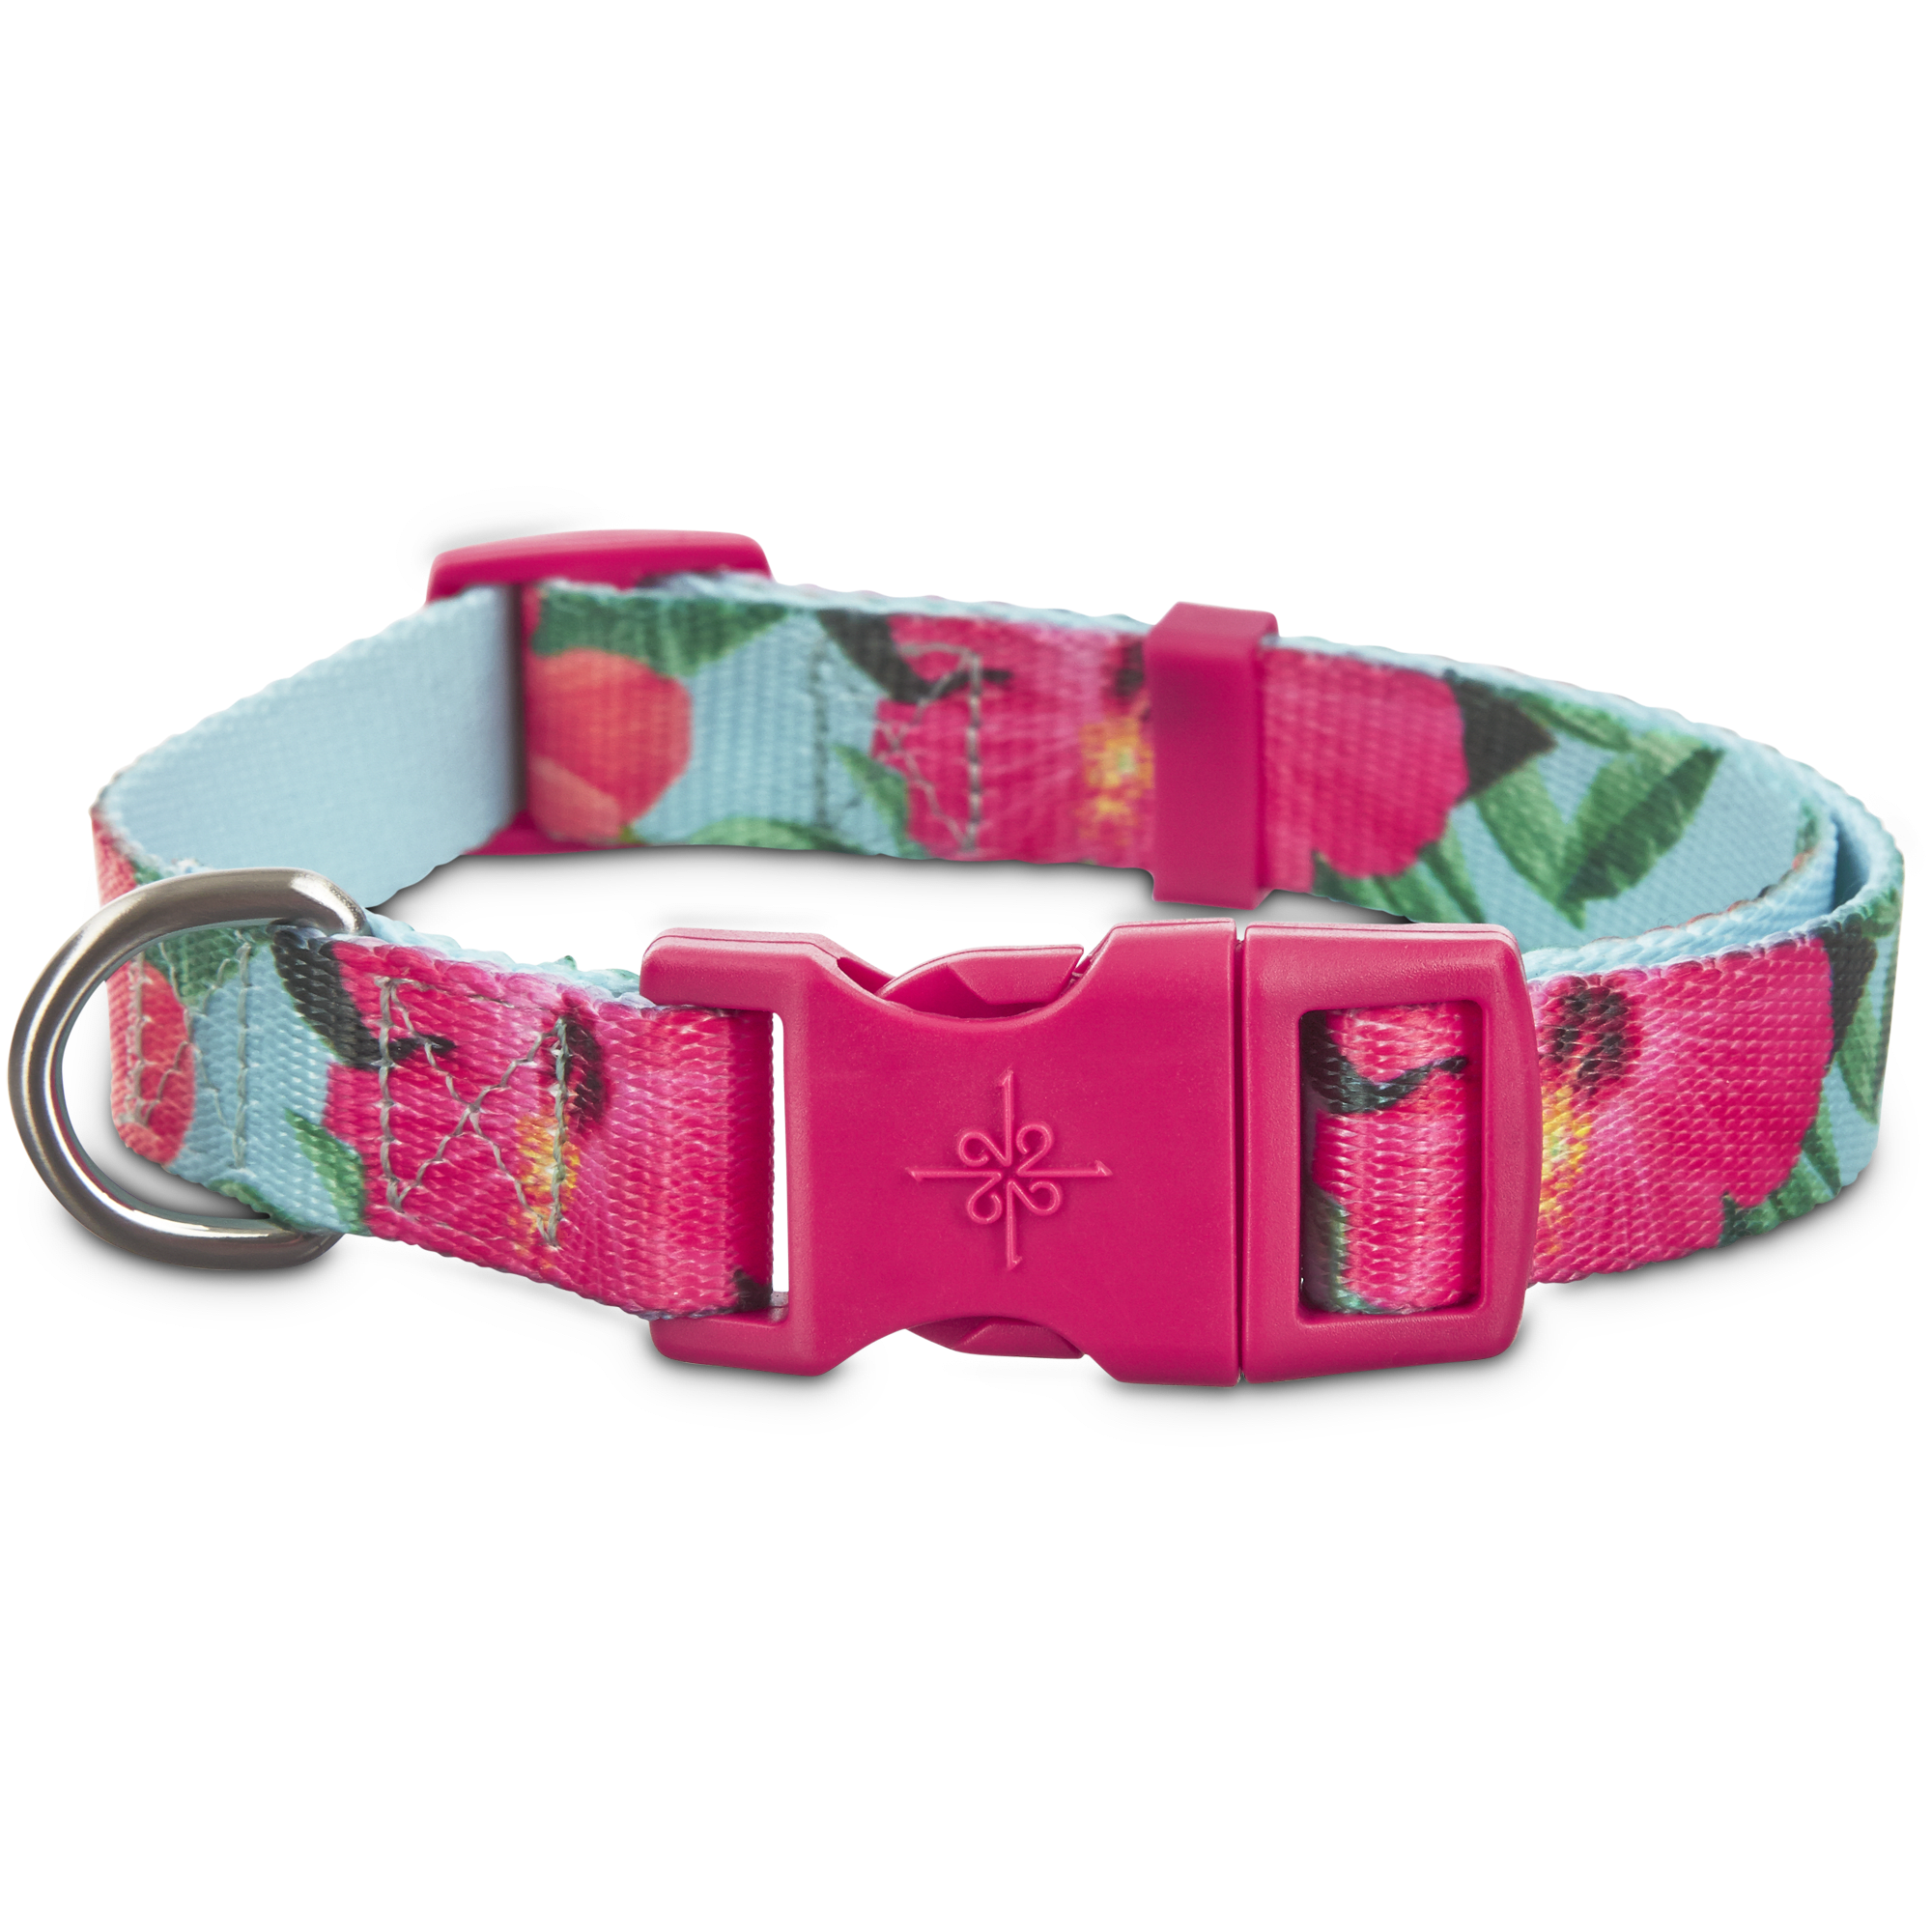 al-sold-out-good2go-dog-collars-reviewthaitravel